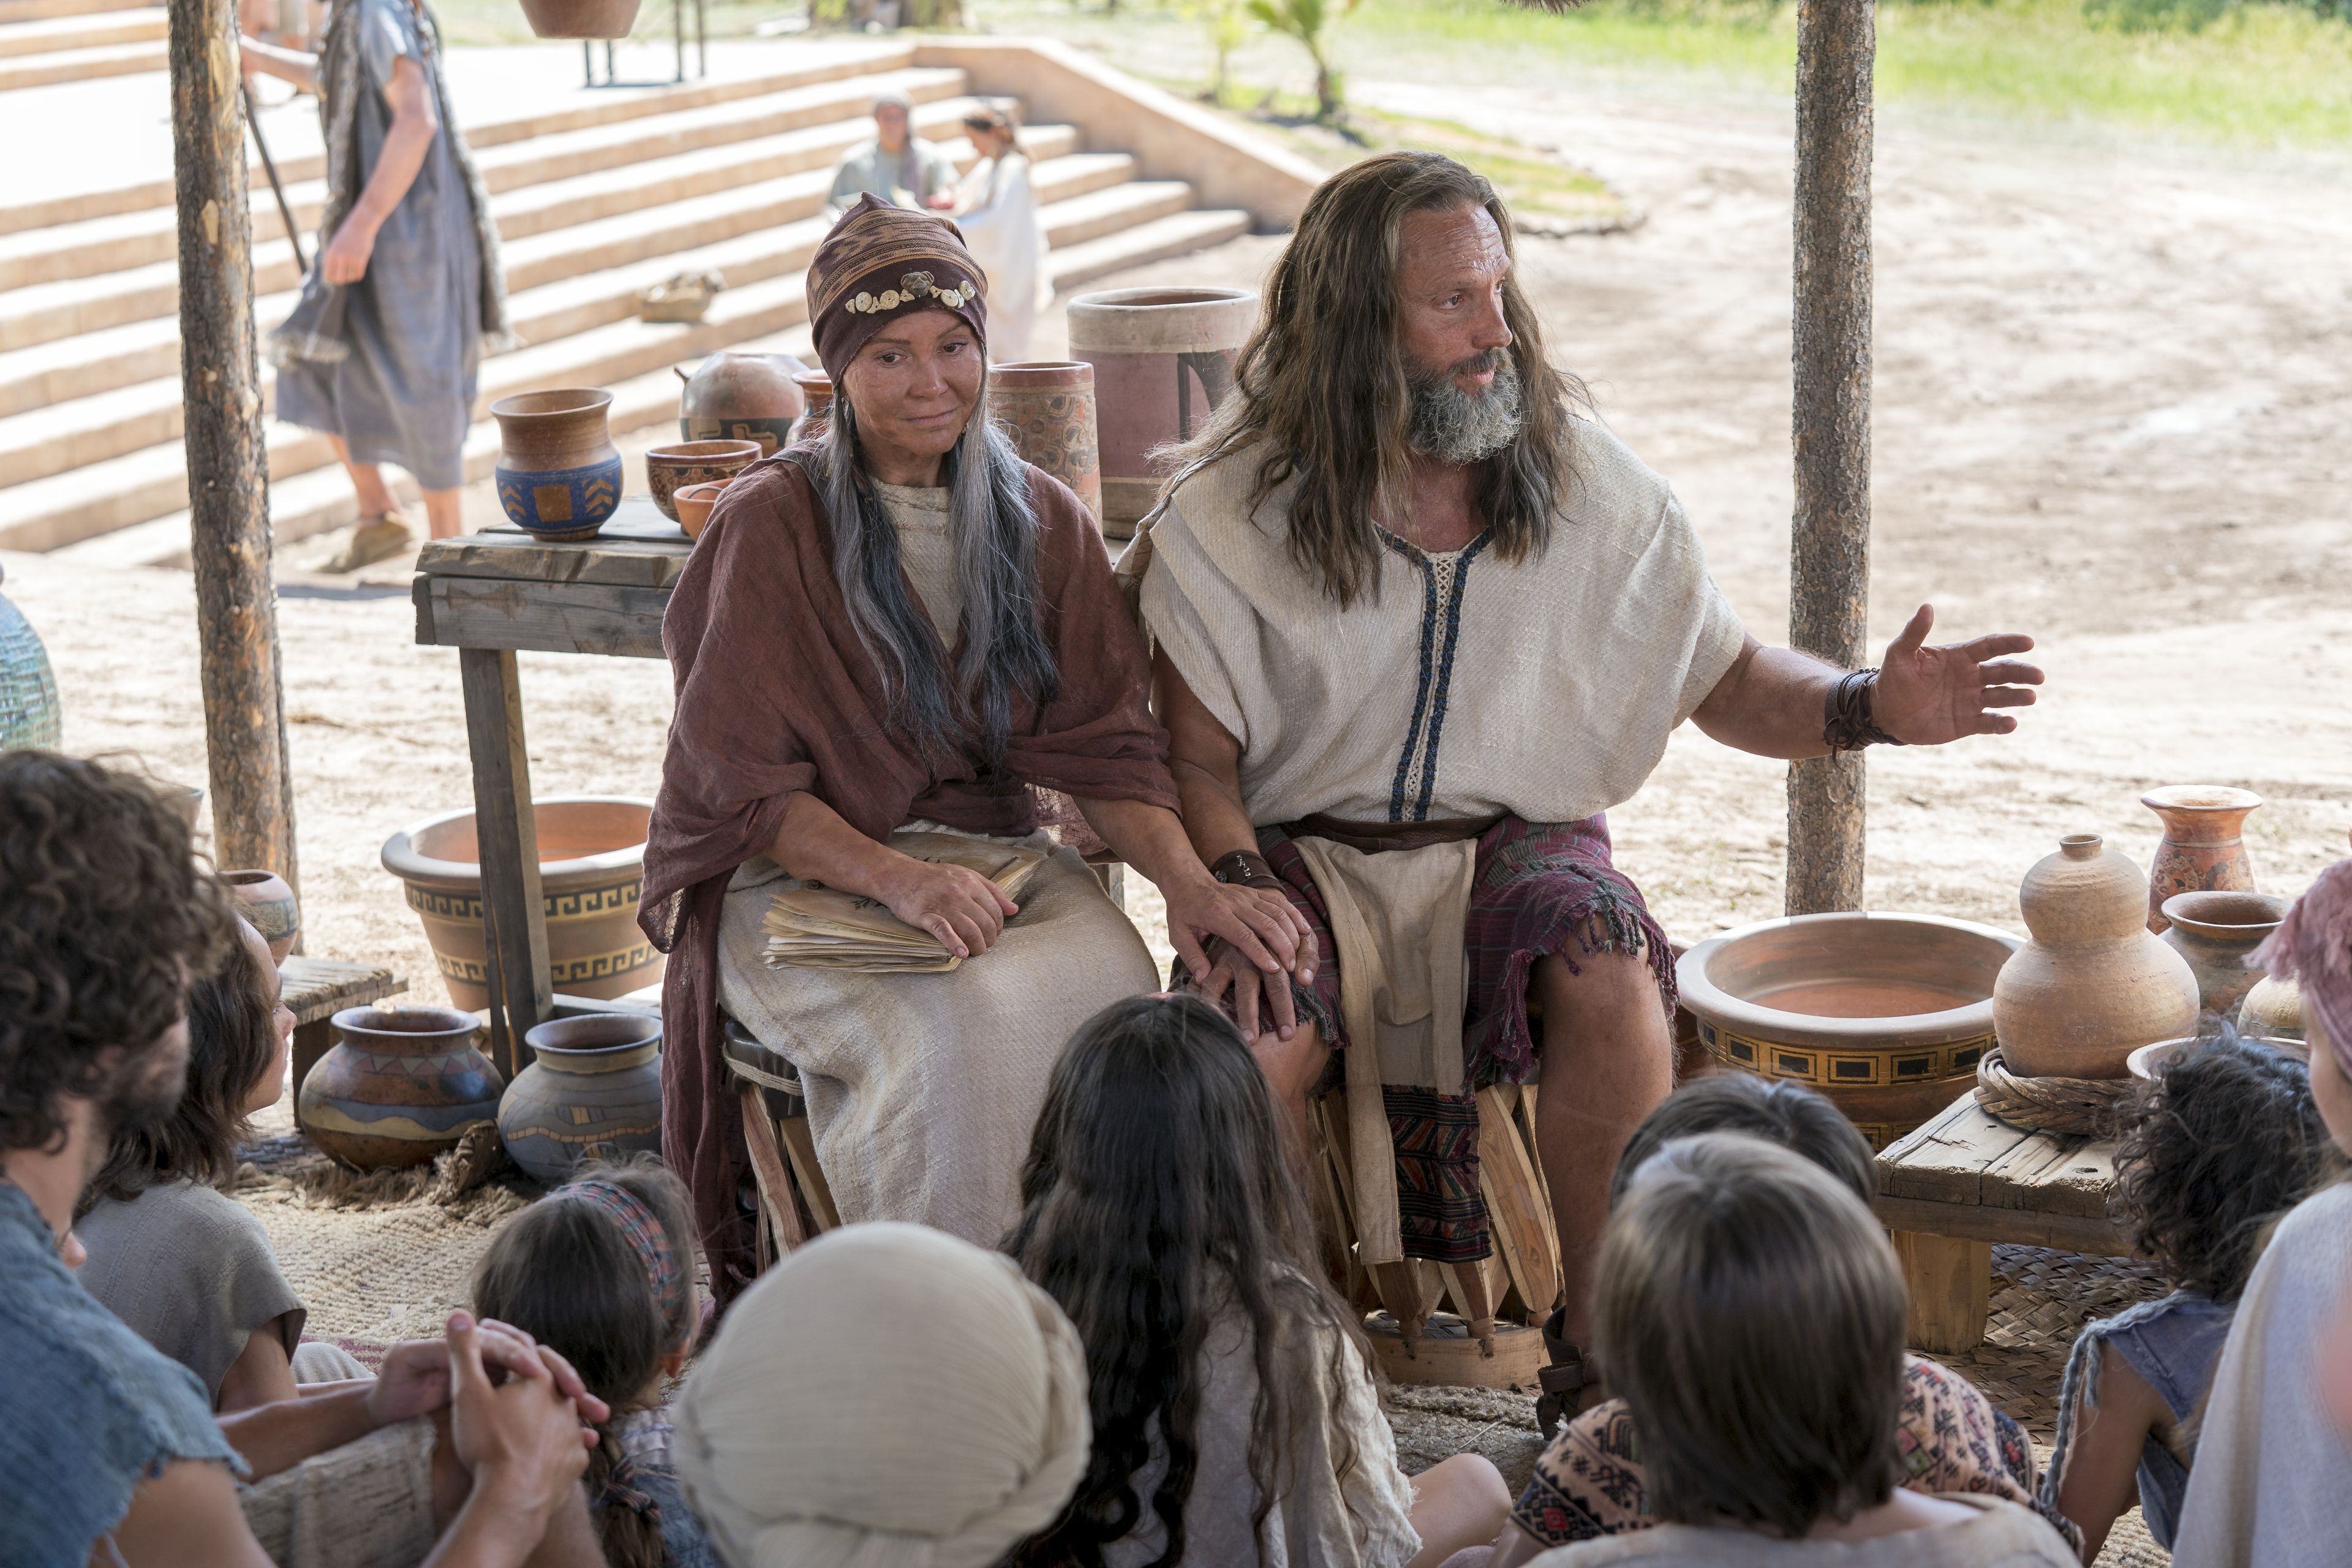 Nephi teaches the Nephites about baptism and the doctrine of Christ.